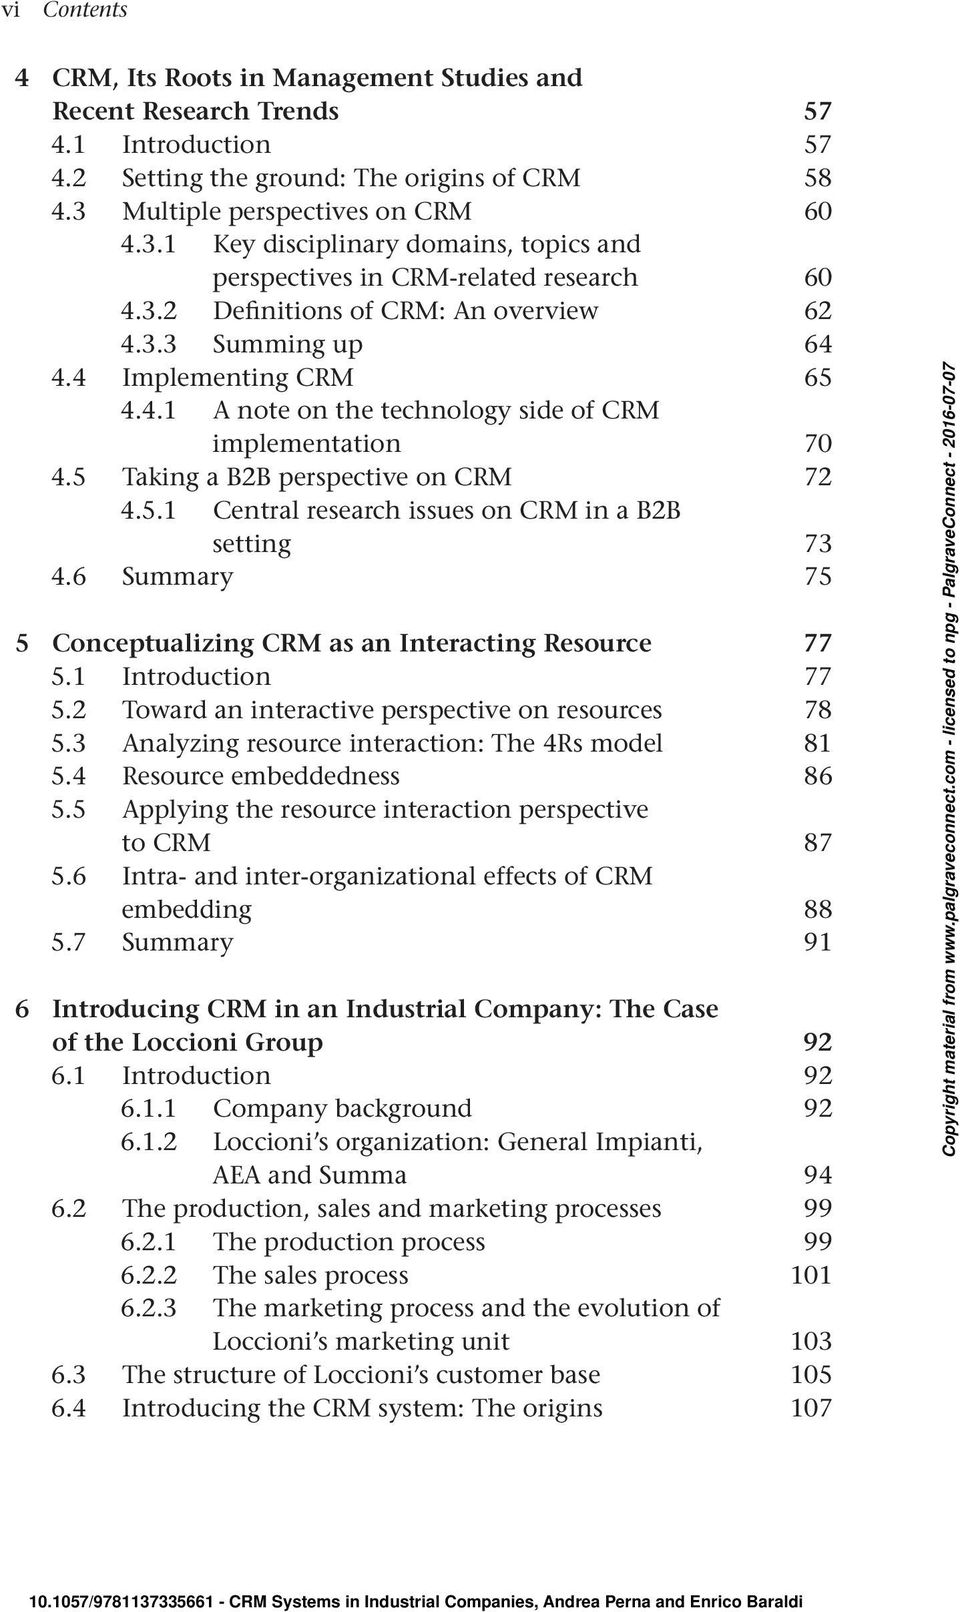 4 Implementing CRM 65 4.4.1 A note on the technology side of CRM implementation 70 4.5 Taking a B2B perspective on CRM 72 4.5.1 Central research issues on CRM in a B2B setting 73 4.